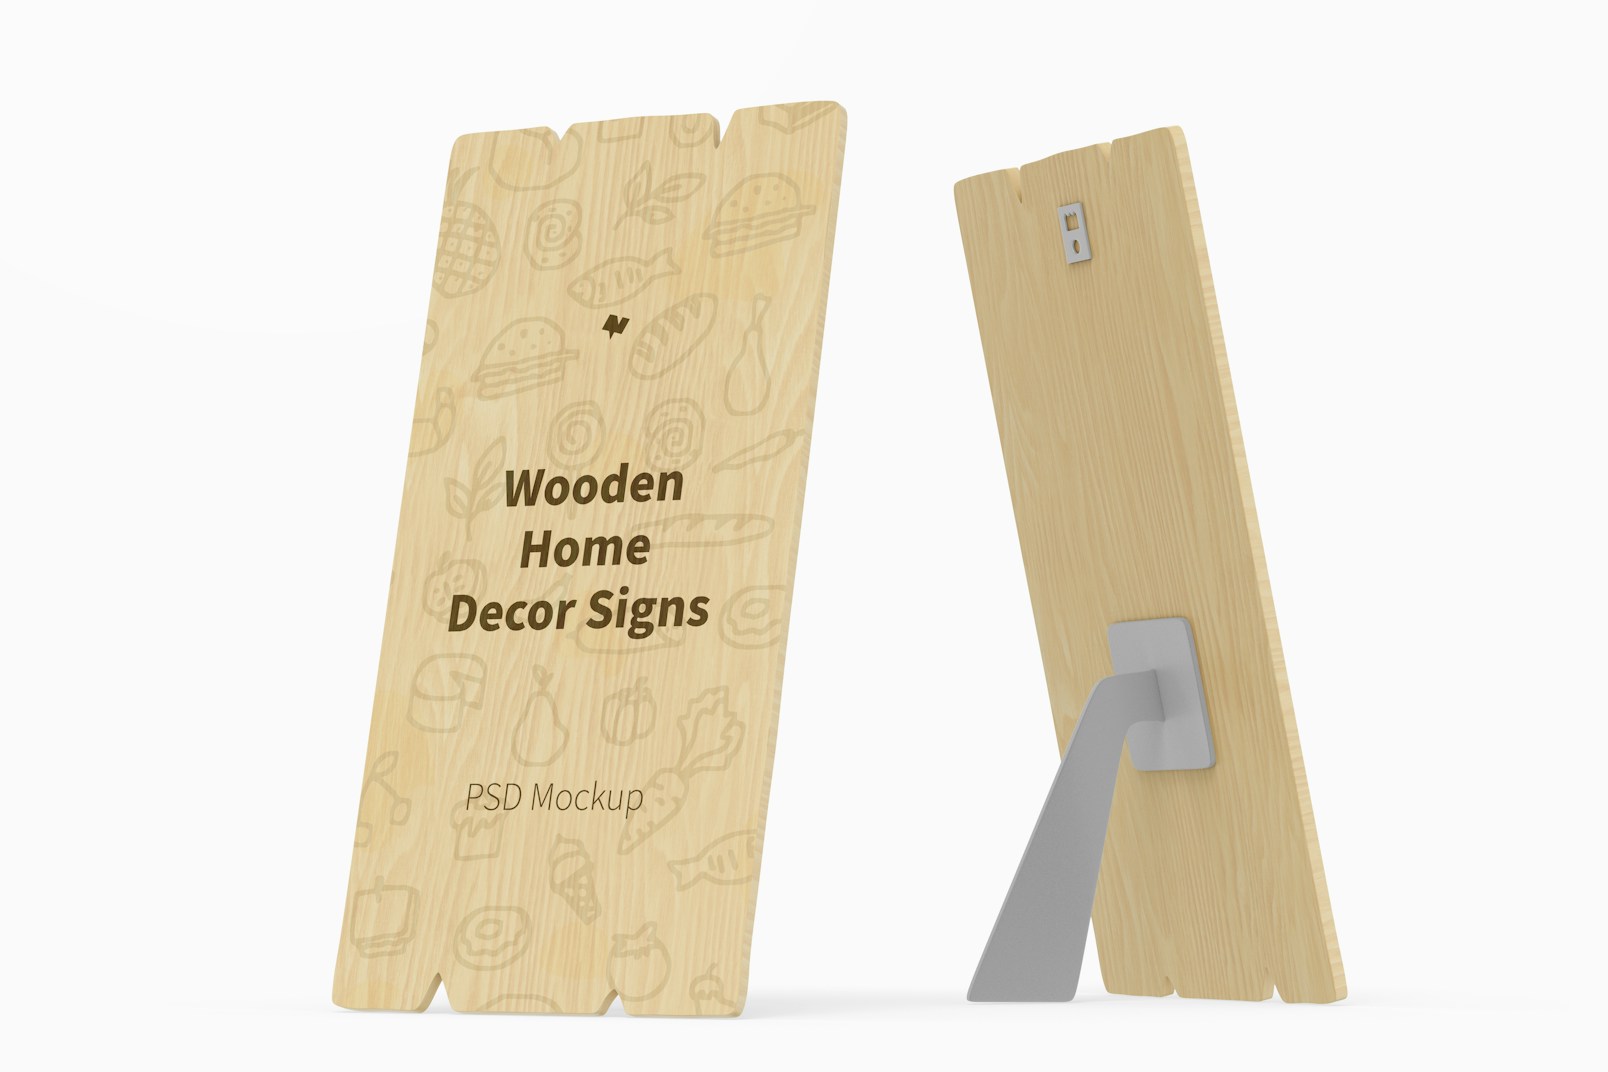 Wooden Home Decor Signs Mockup, Front and Back View